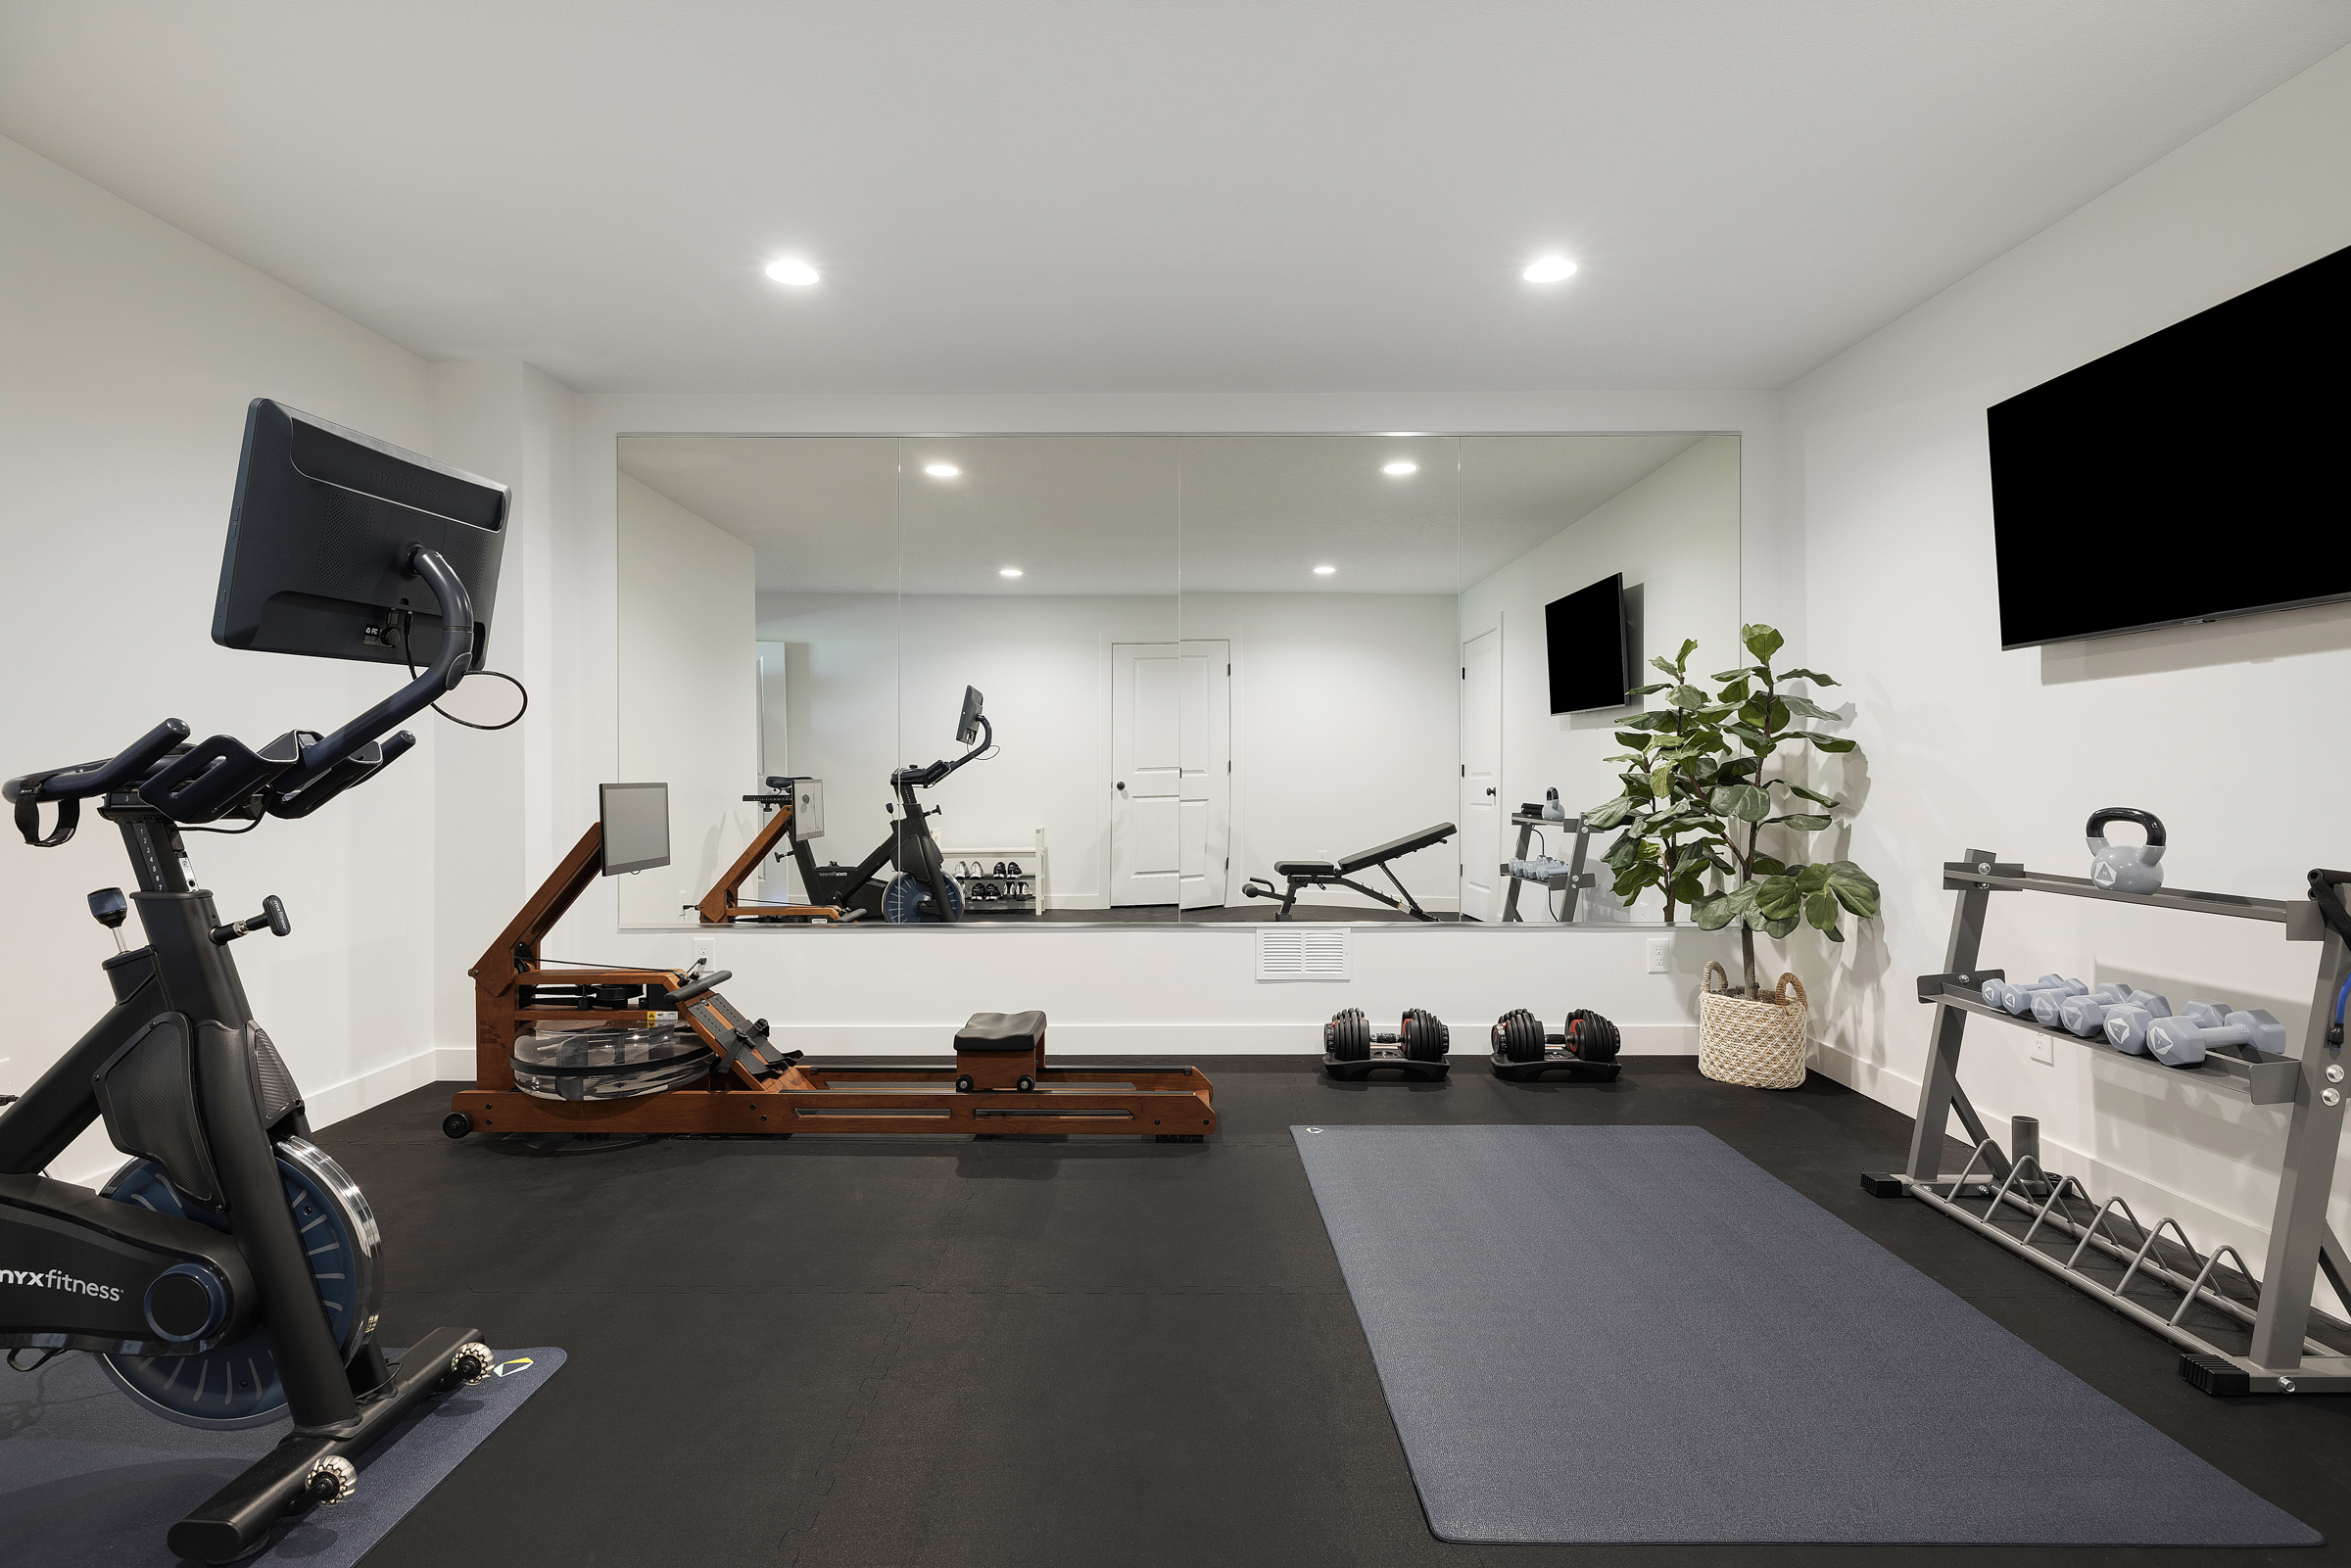 The Styled Press Gym Reveal | Before and After 91